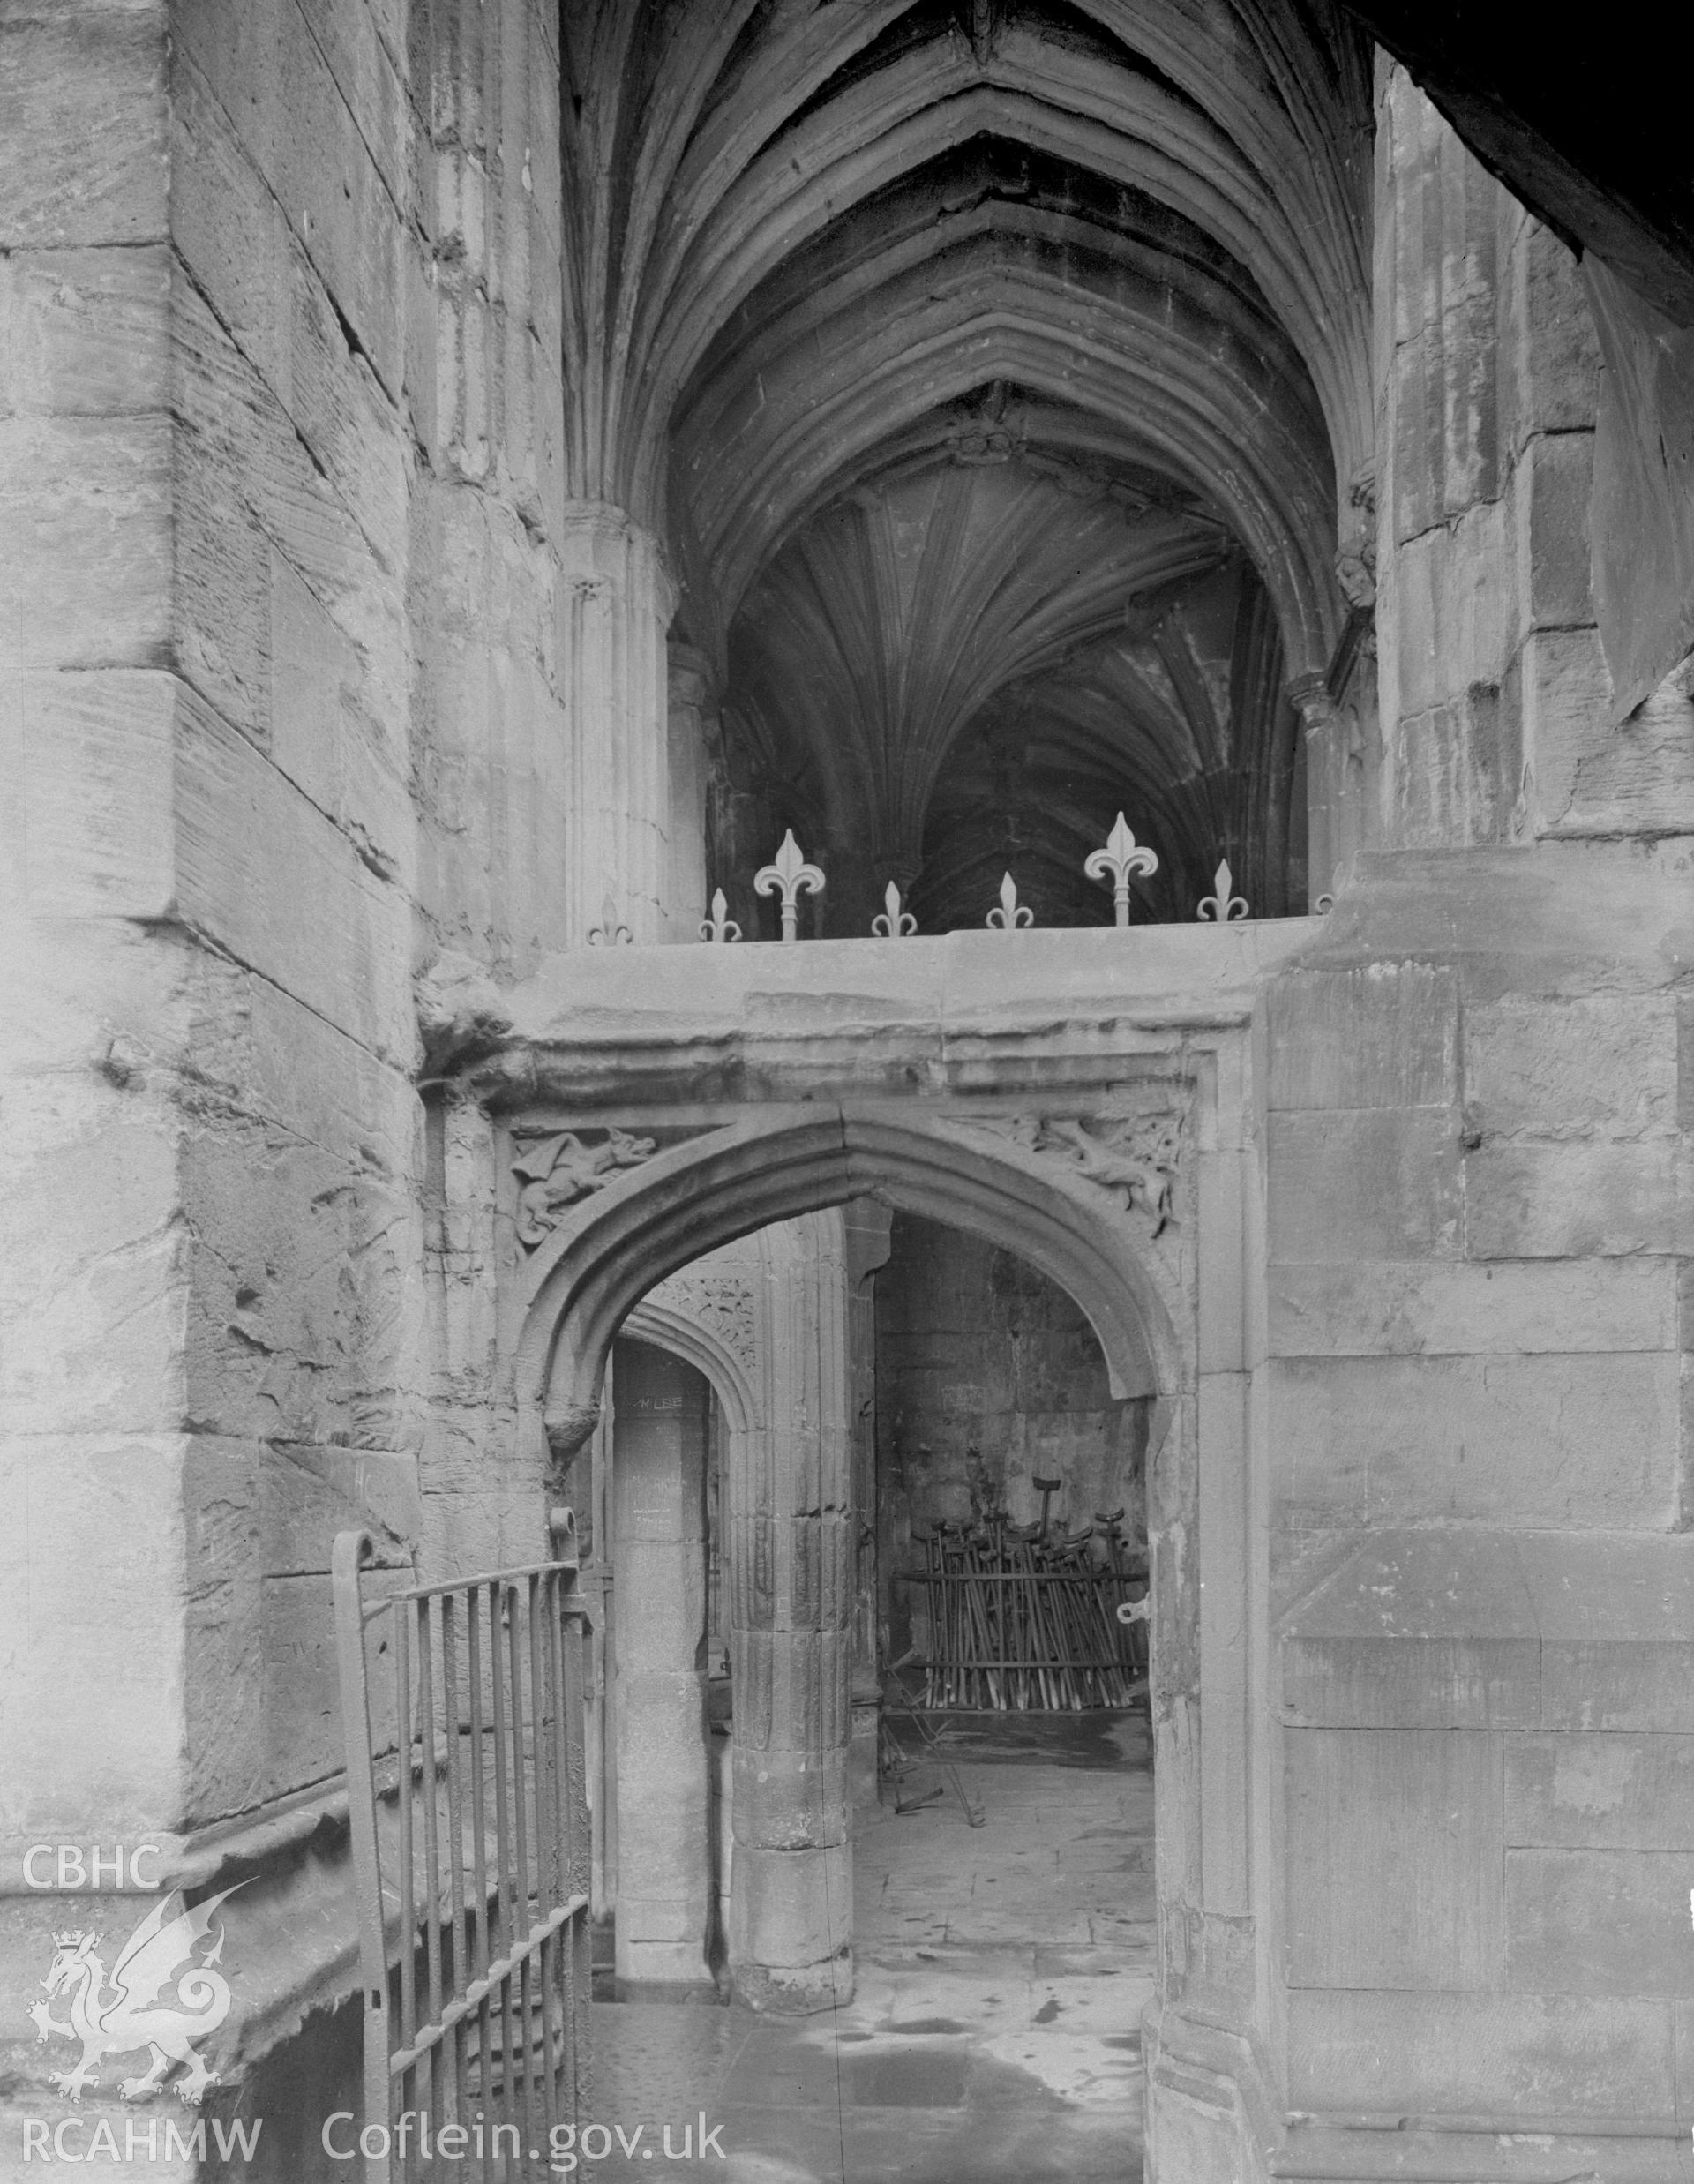 Exterior view showing the north entrance to the well at St Winifred's Chapel, Holywell  taken 13.05.1942.